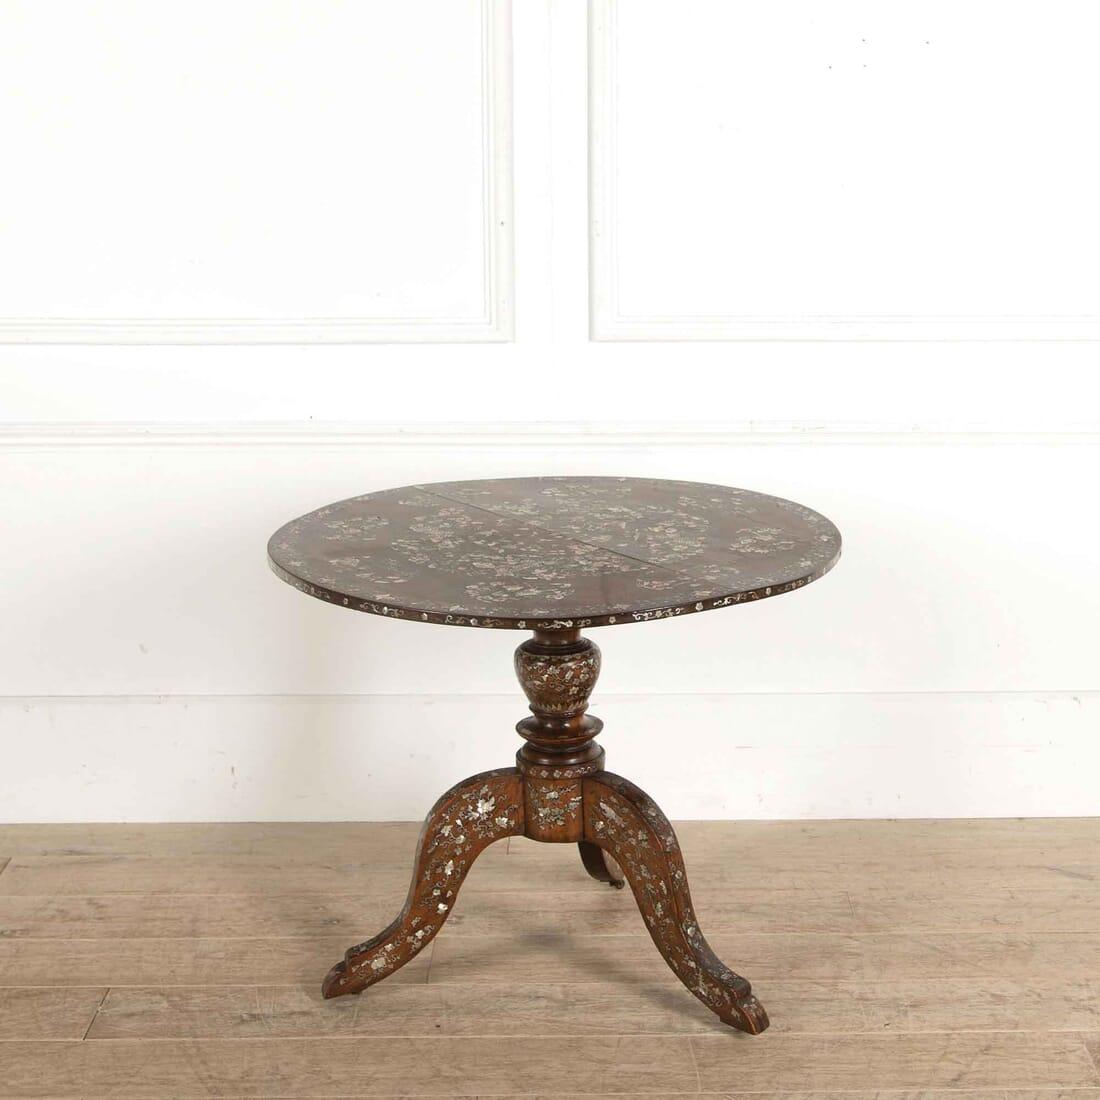 A striking Anglo-Chinese tripod table with mother of pearl inlay to the top and base circa 1880.